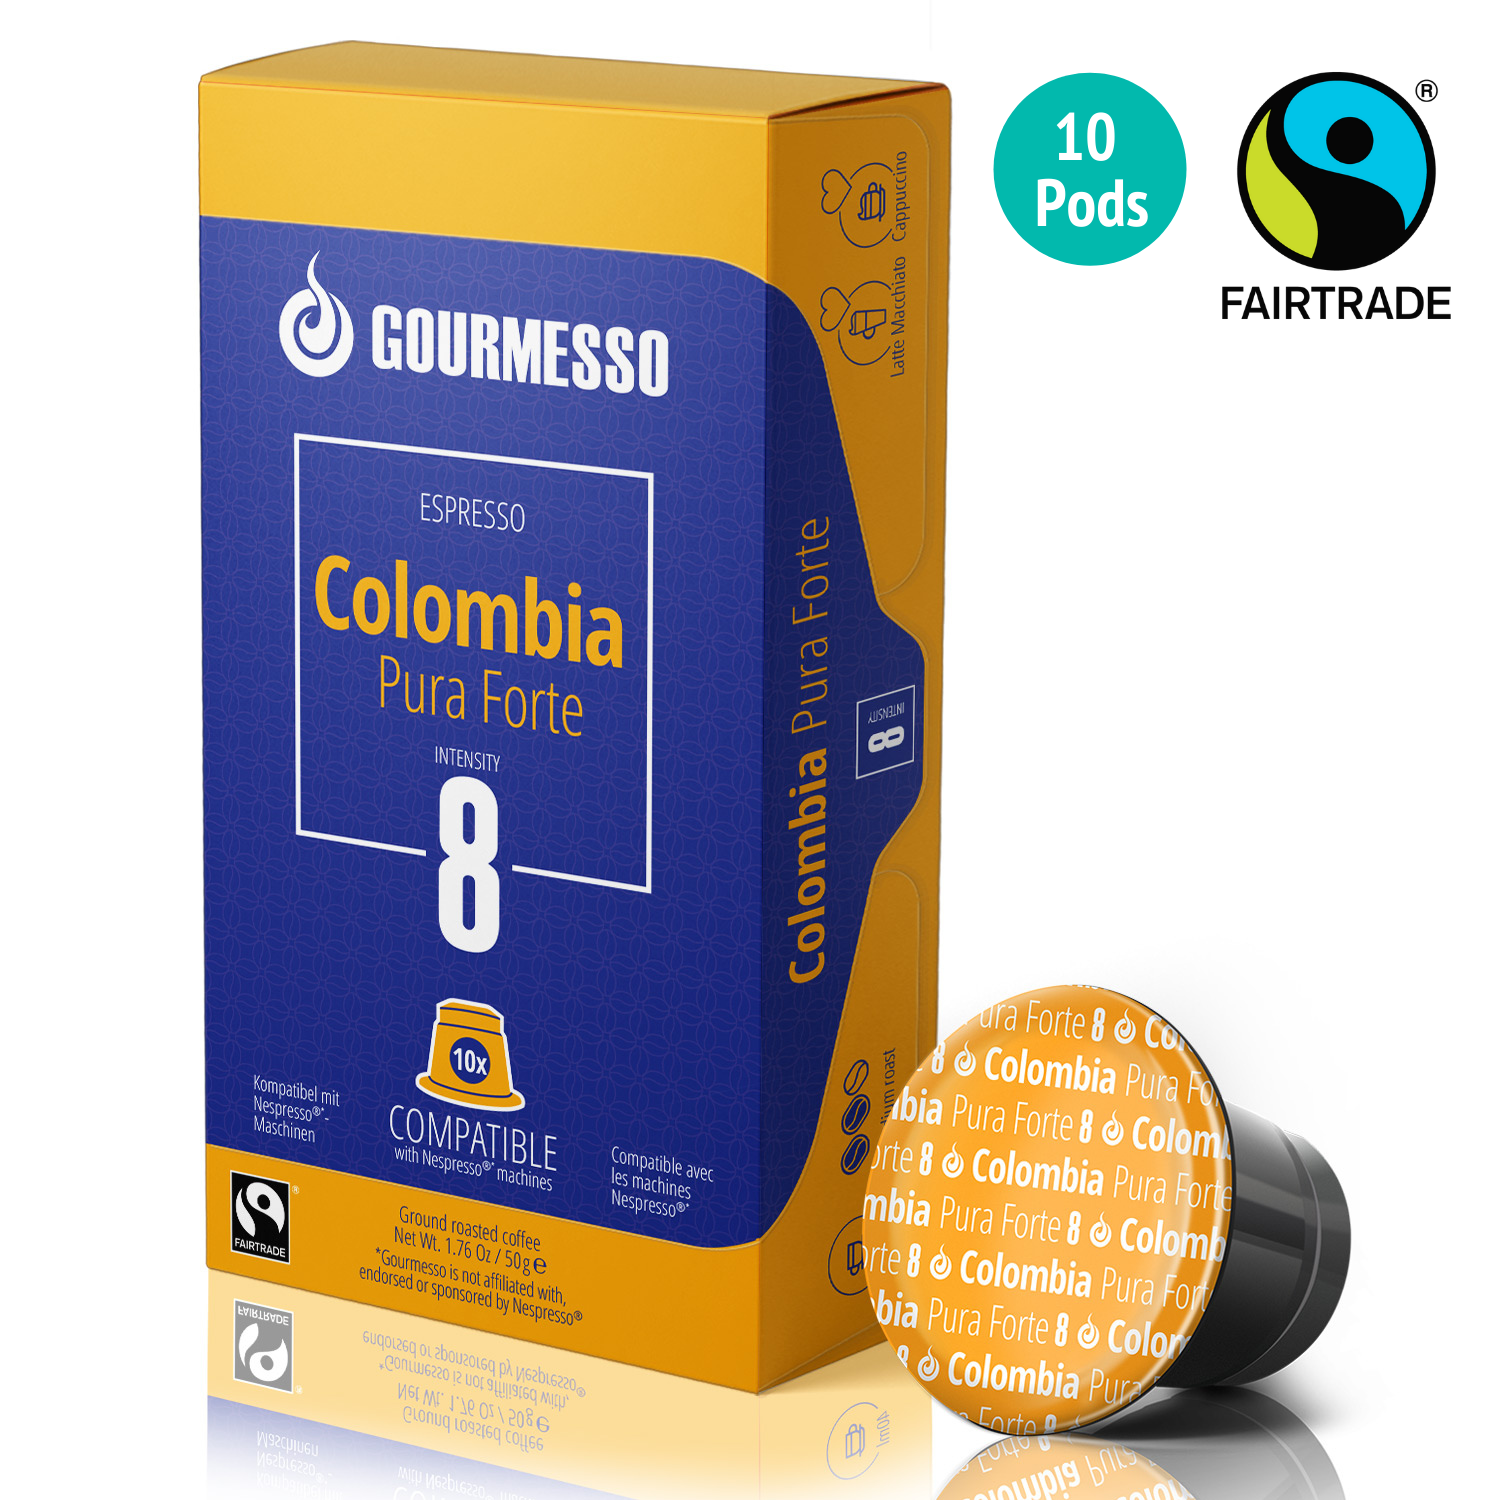 Colombia Fair Trade Coffee Capsules, Colombian Coffee